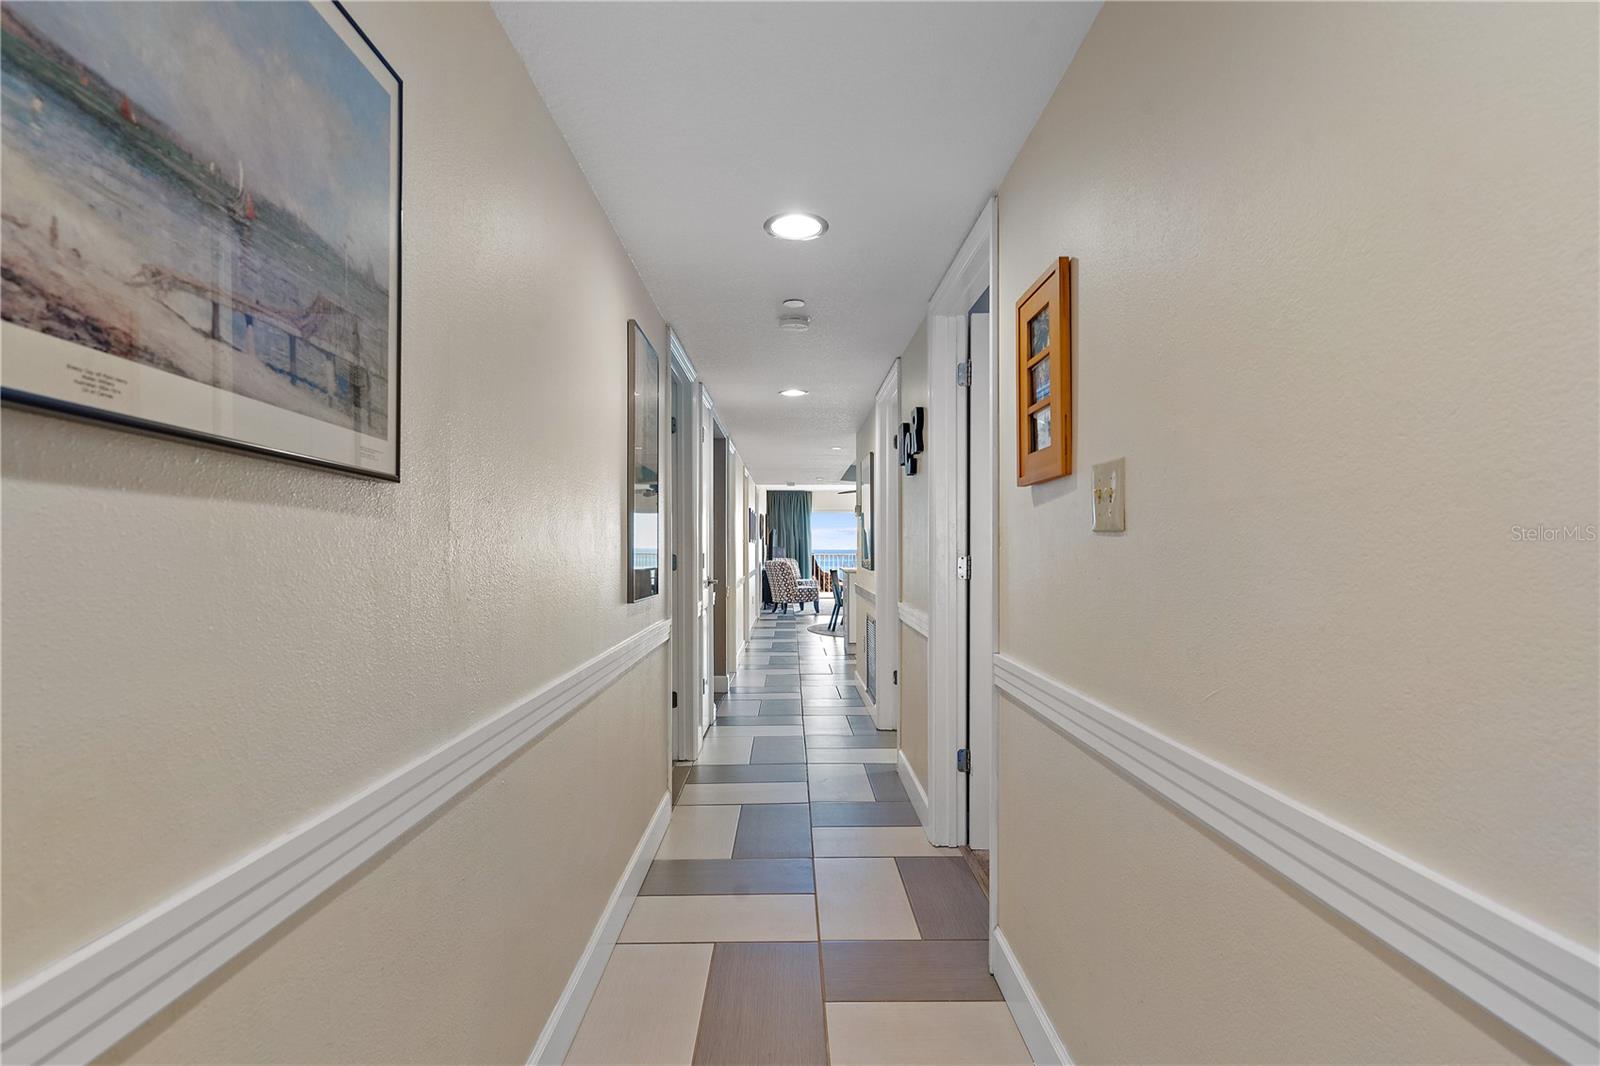 The entrance hall creates a great first impression with attractive tile patterns, chair rail, and direct access to bedrooms two and three as well as the laundry room. It is bright and cheery.